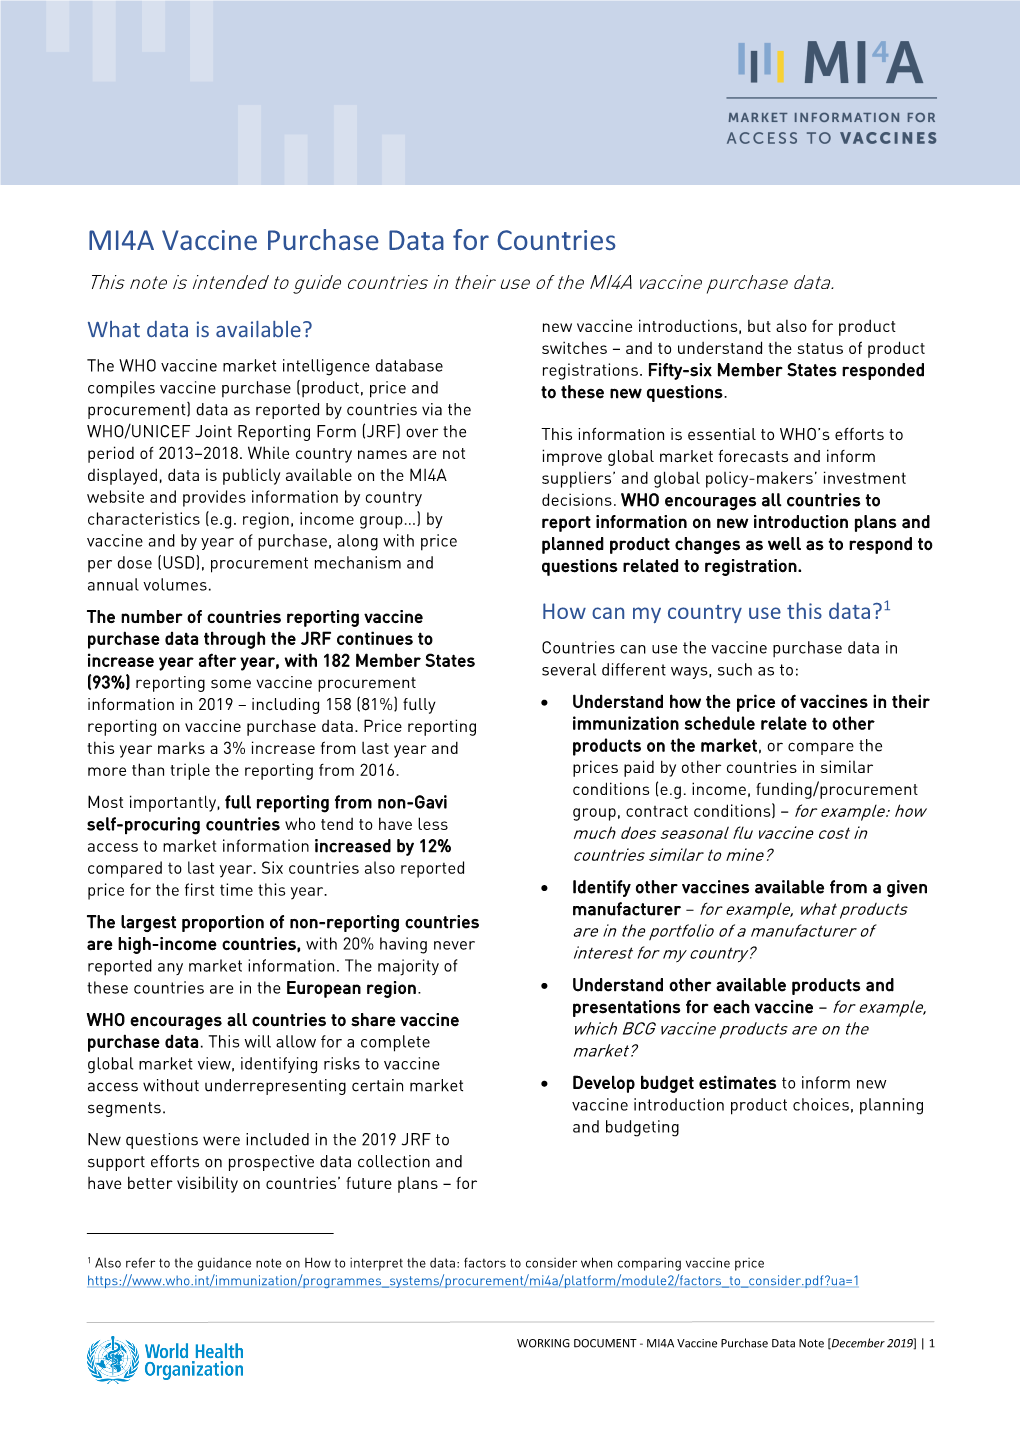 MI4A Vaccine Purchase Data for Countries This Note Is Intended to Guide Countries in Their Use of the MI4A Vaccine Purchase Data